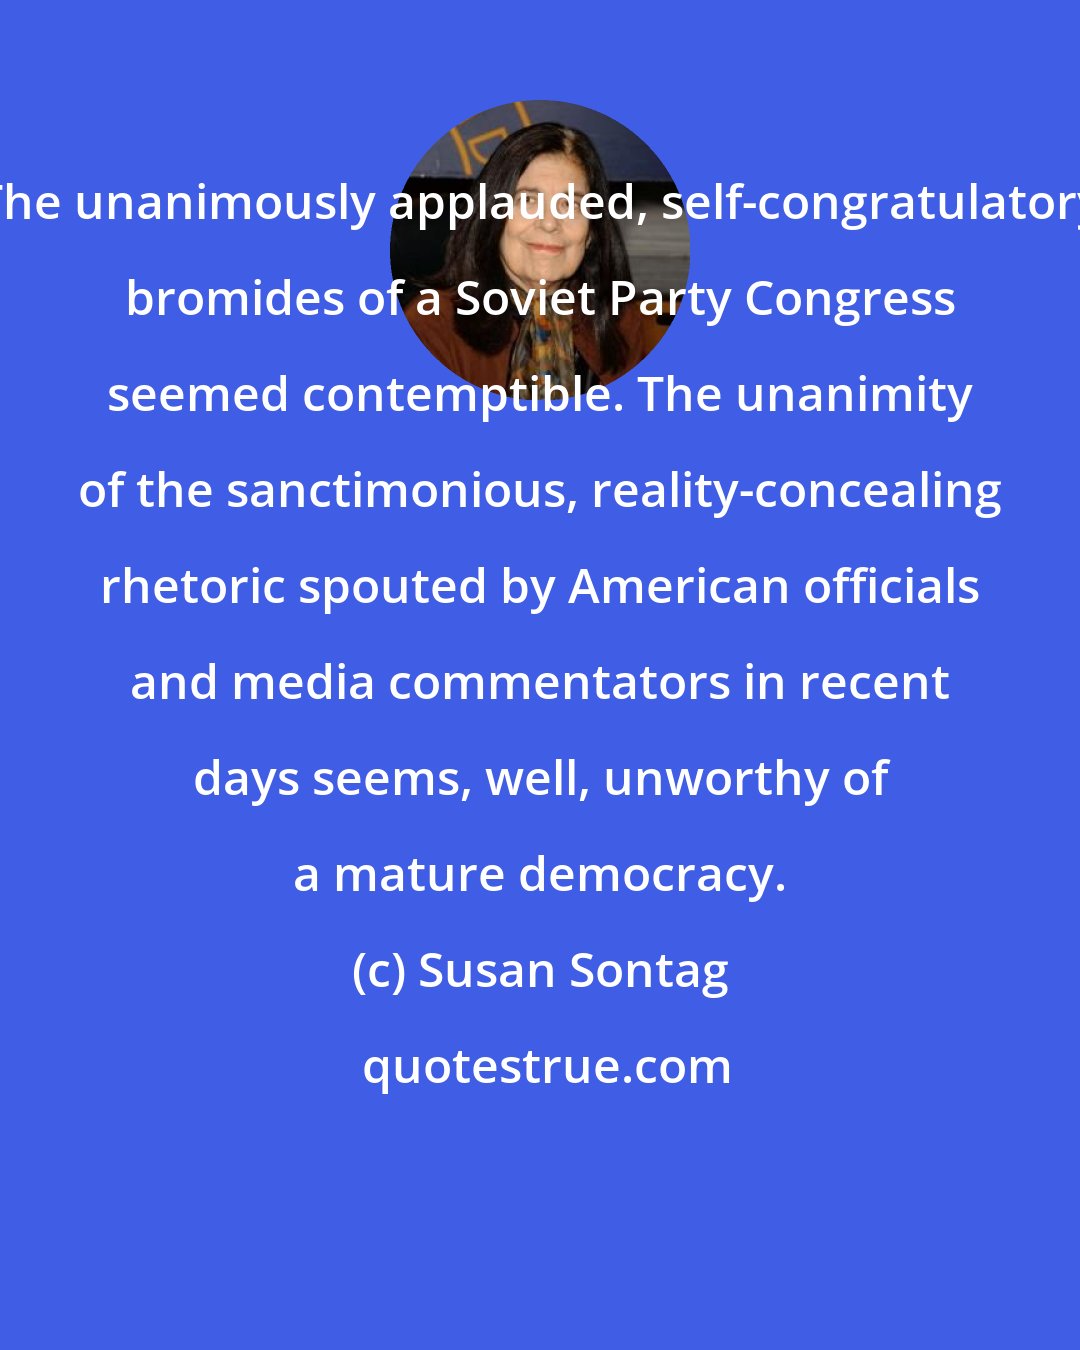 Susan Sontag: The unanimously applauded, self-congratulatory bromides of a Soviet Party Congress seemed contemptible. The unanimity of the sanctimonious, reality-concealing rhetoric spouted by American officials and media commentators in recent days seems, well, unworthy of a mature democracy.